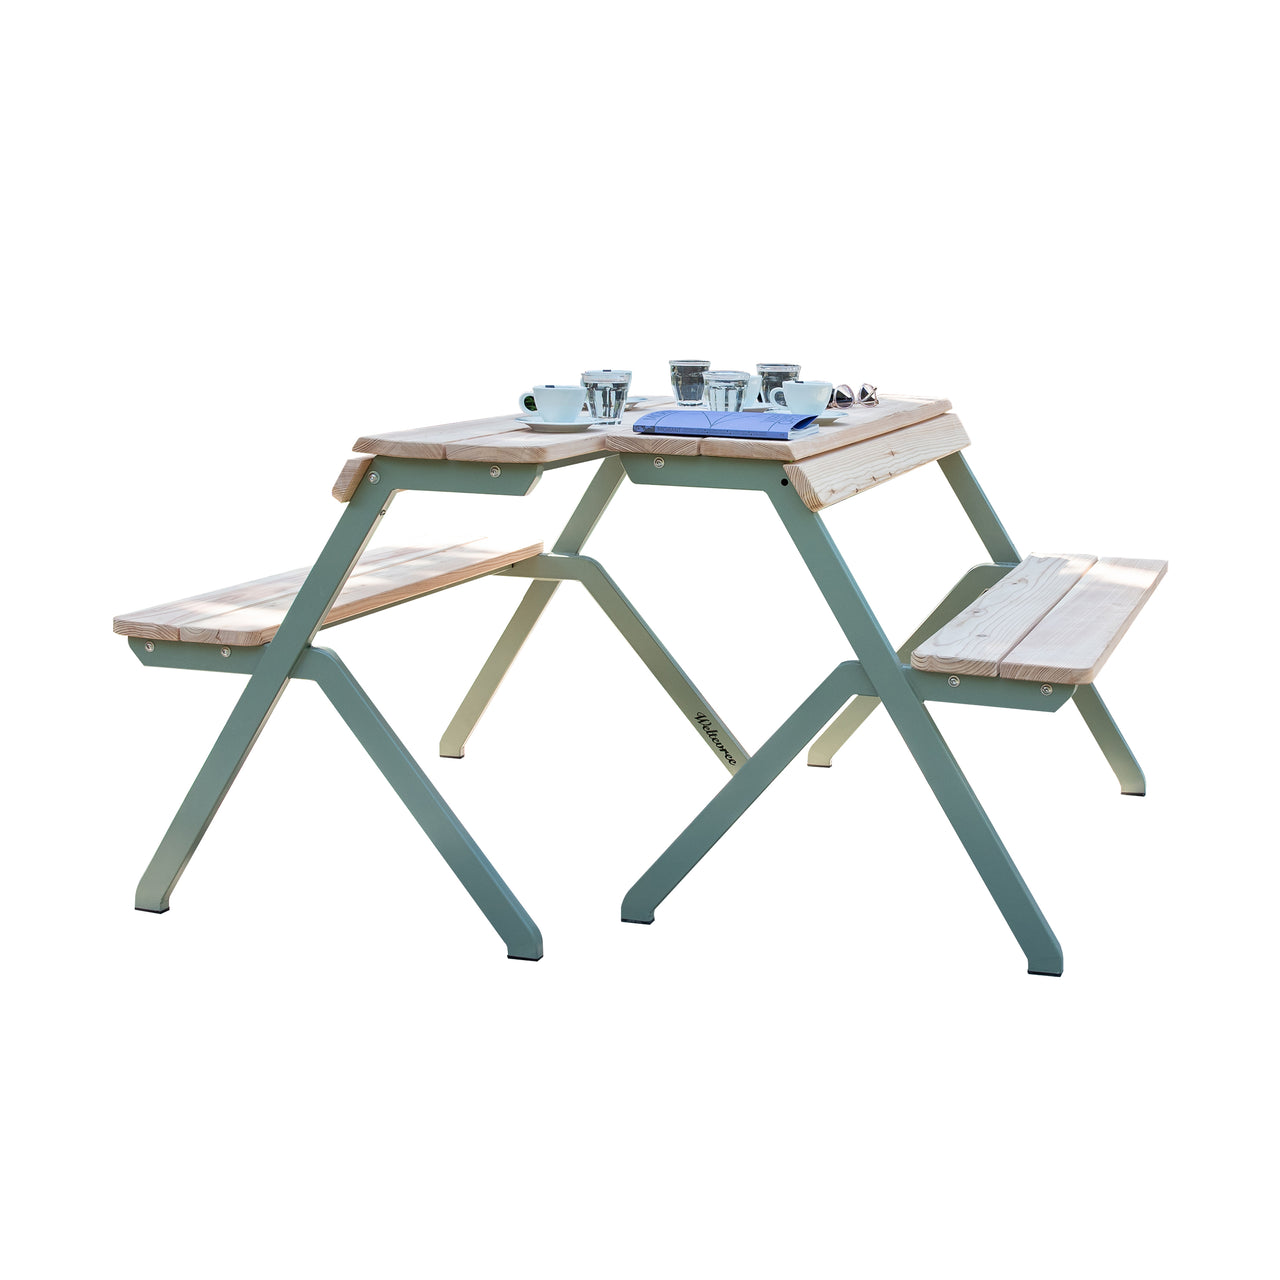 Tablebench 2-Seater: Larch